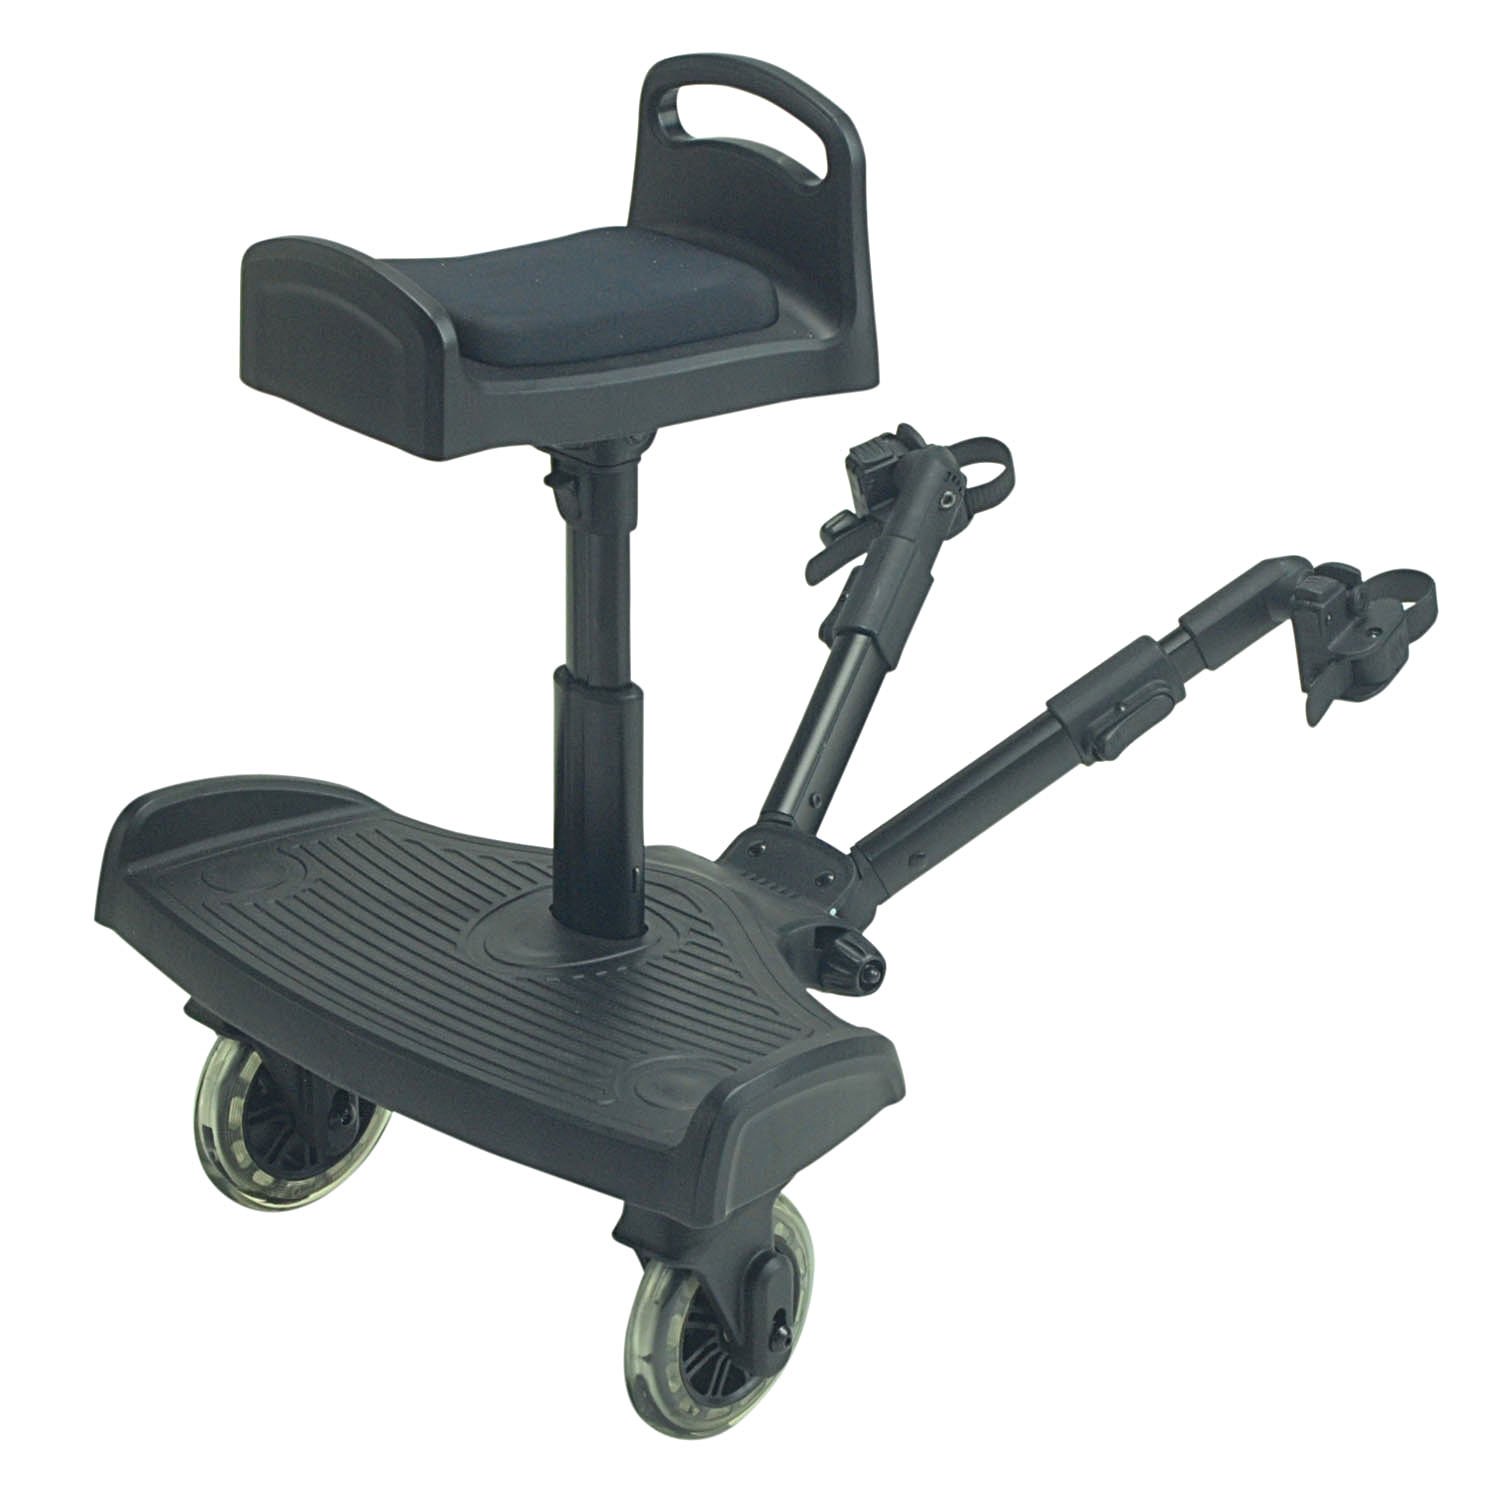 For-Your-Little-Ride On Board kompatibel Baby Bus Systemen, Duo Twin